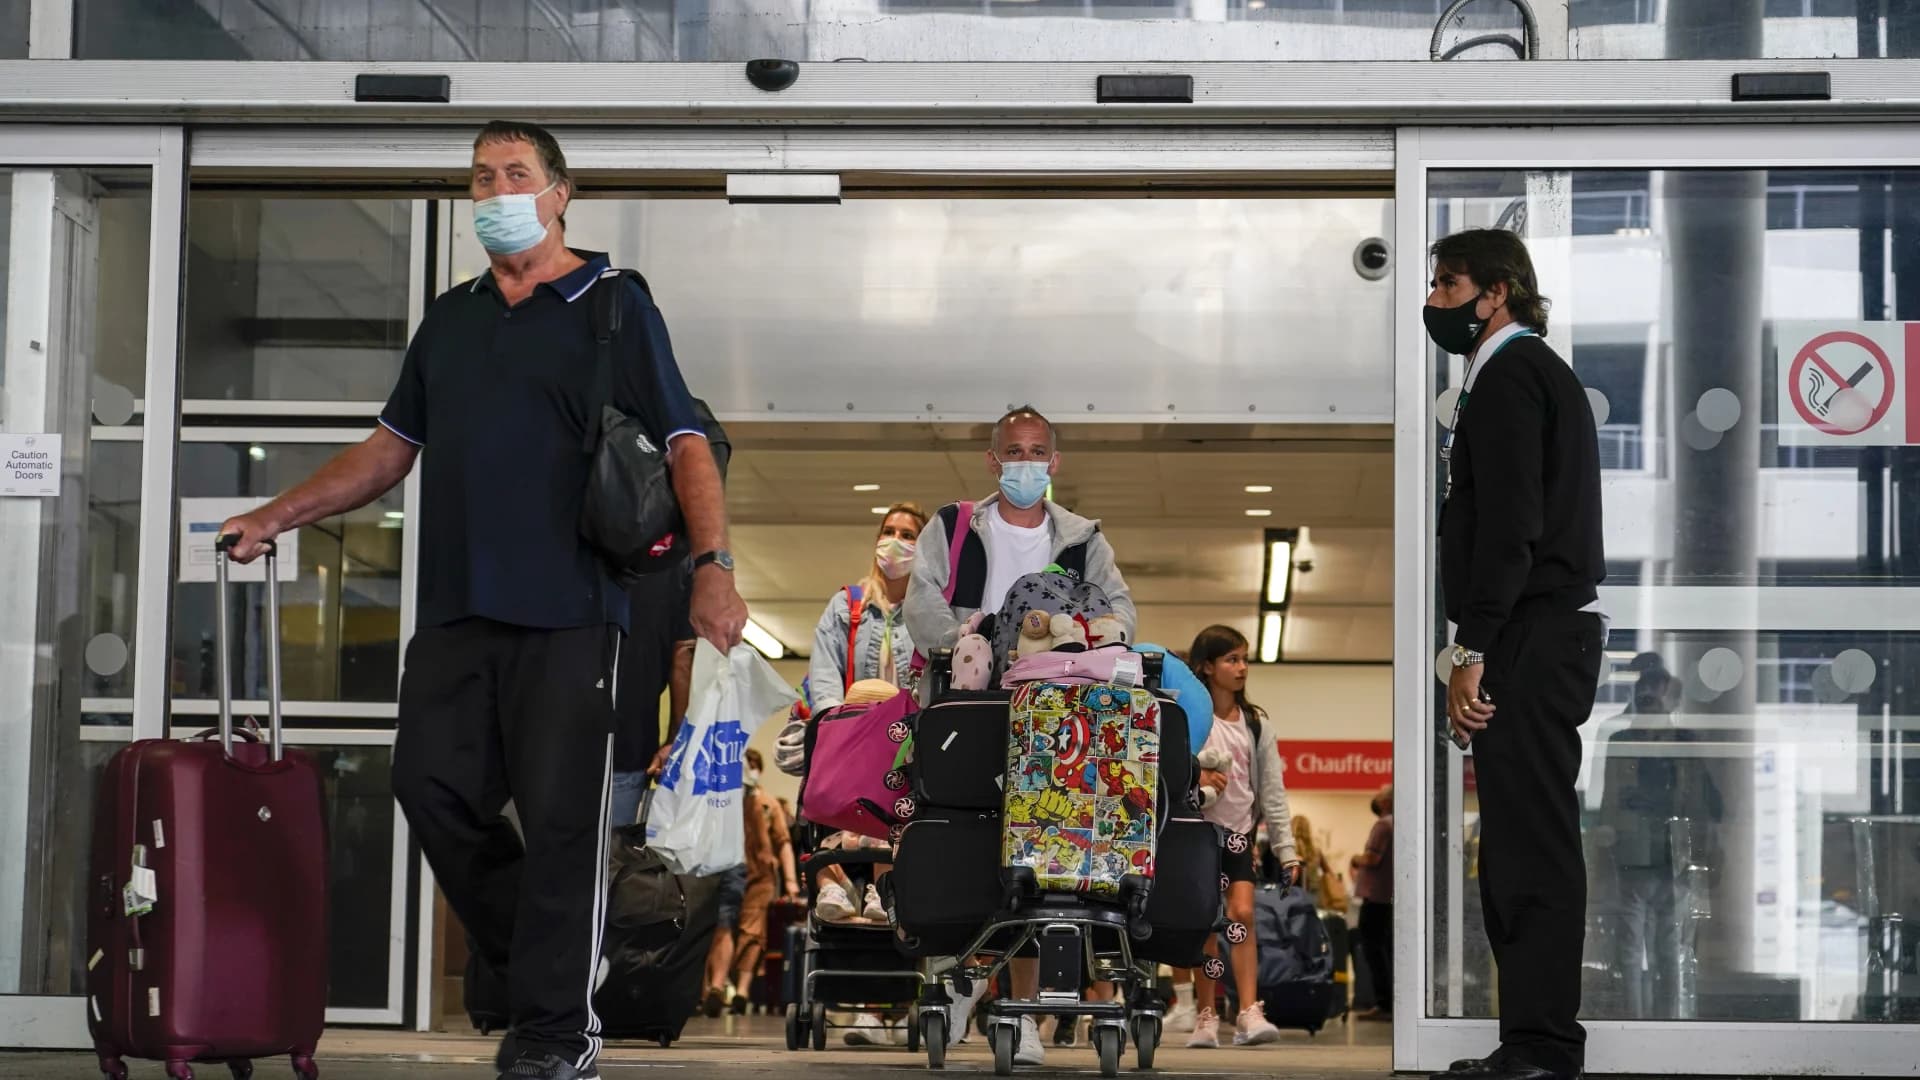 CDC releases travel advisory for 'very high risk' of COVID-19 destinations